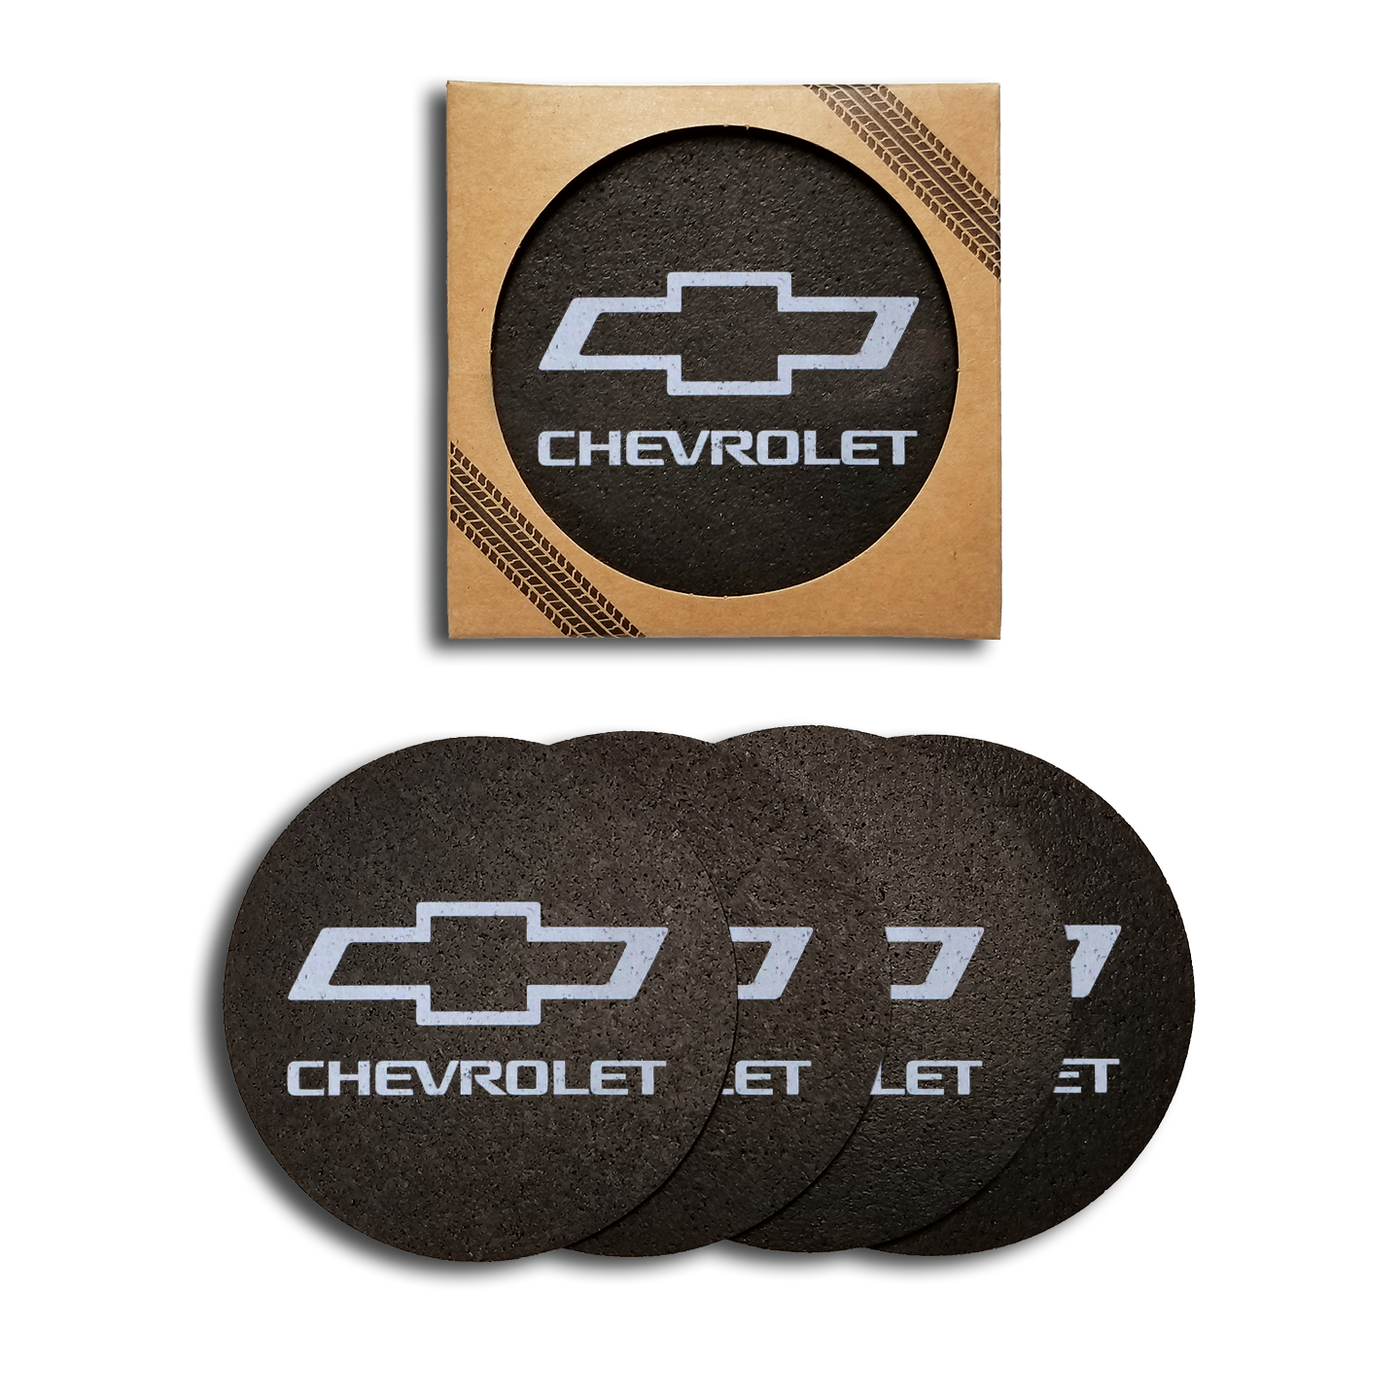 Chevrolet Recycled Rubber Tire (4 Pack) Coaster Set *Made In The USA